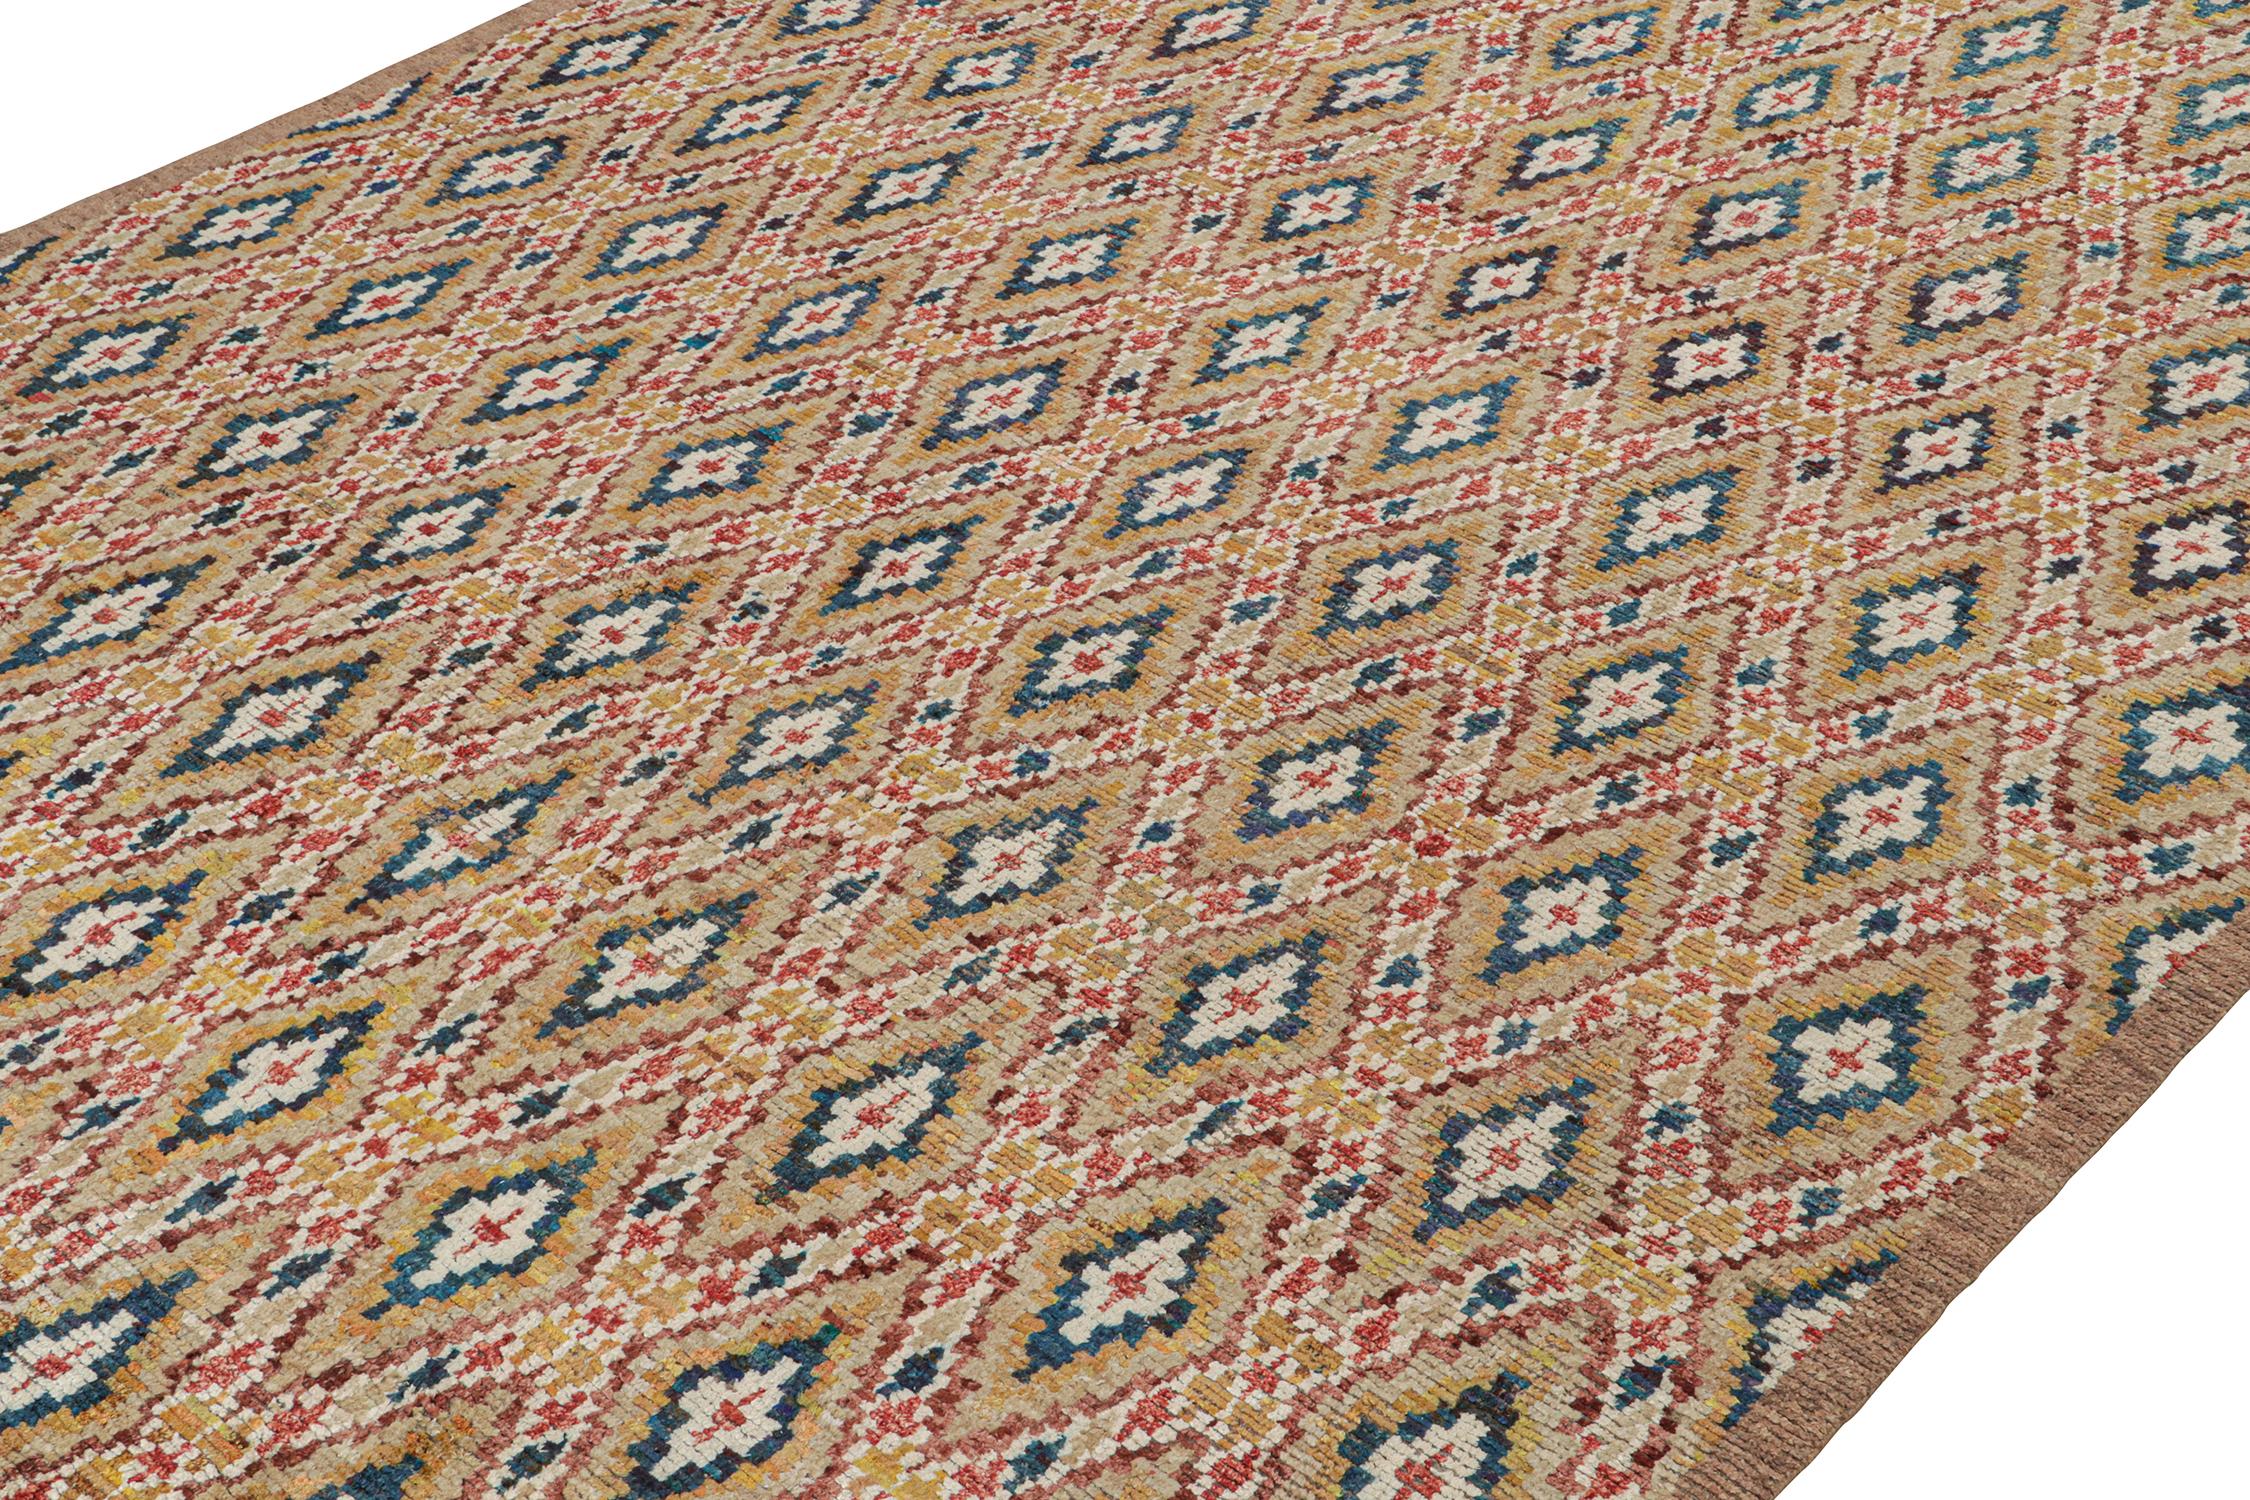 Indian Rug & Kilim’s Moroccan Style Rug in Beige with Colorful Diamond Patterns For Sale